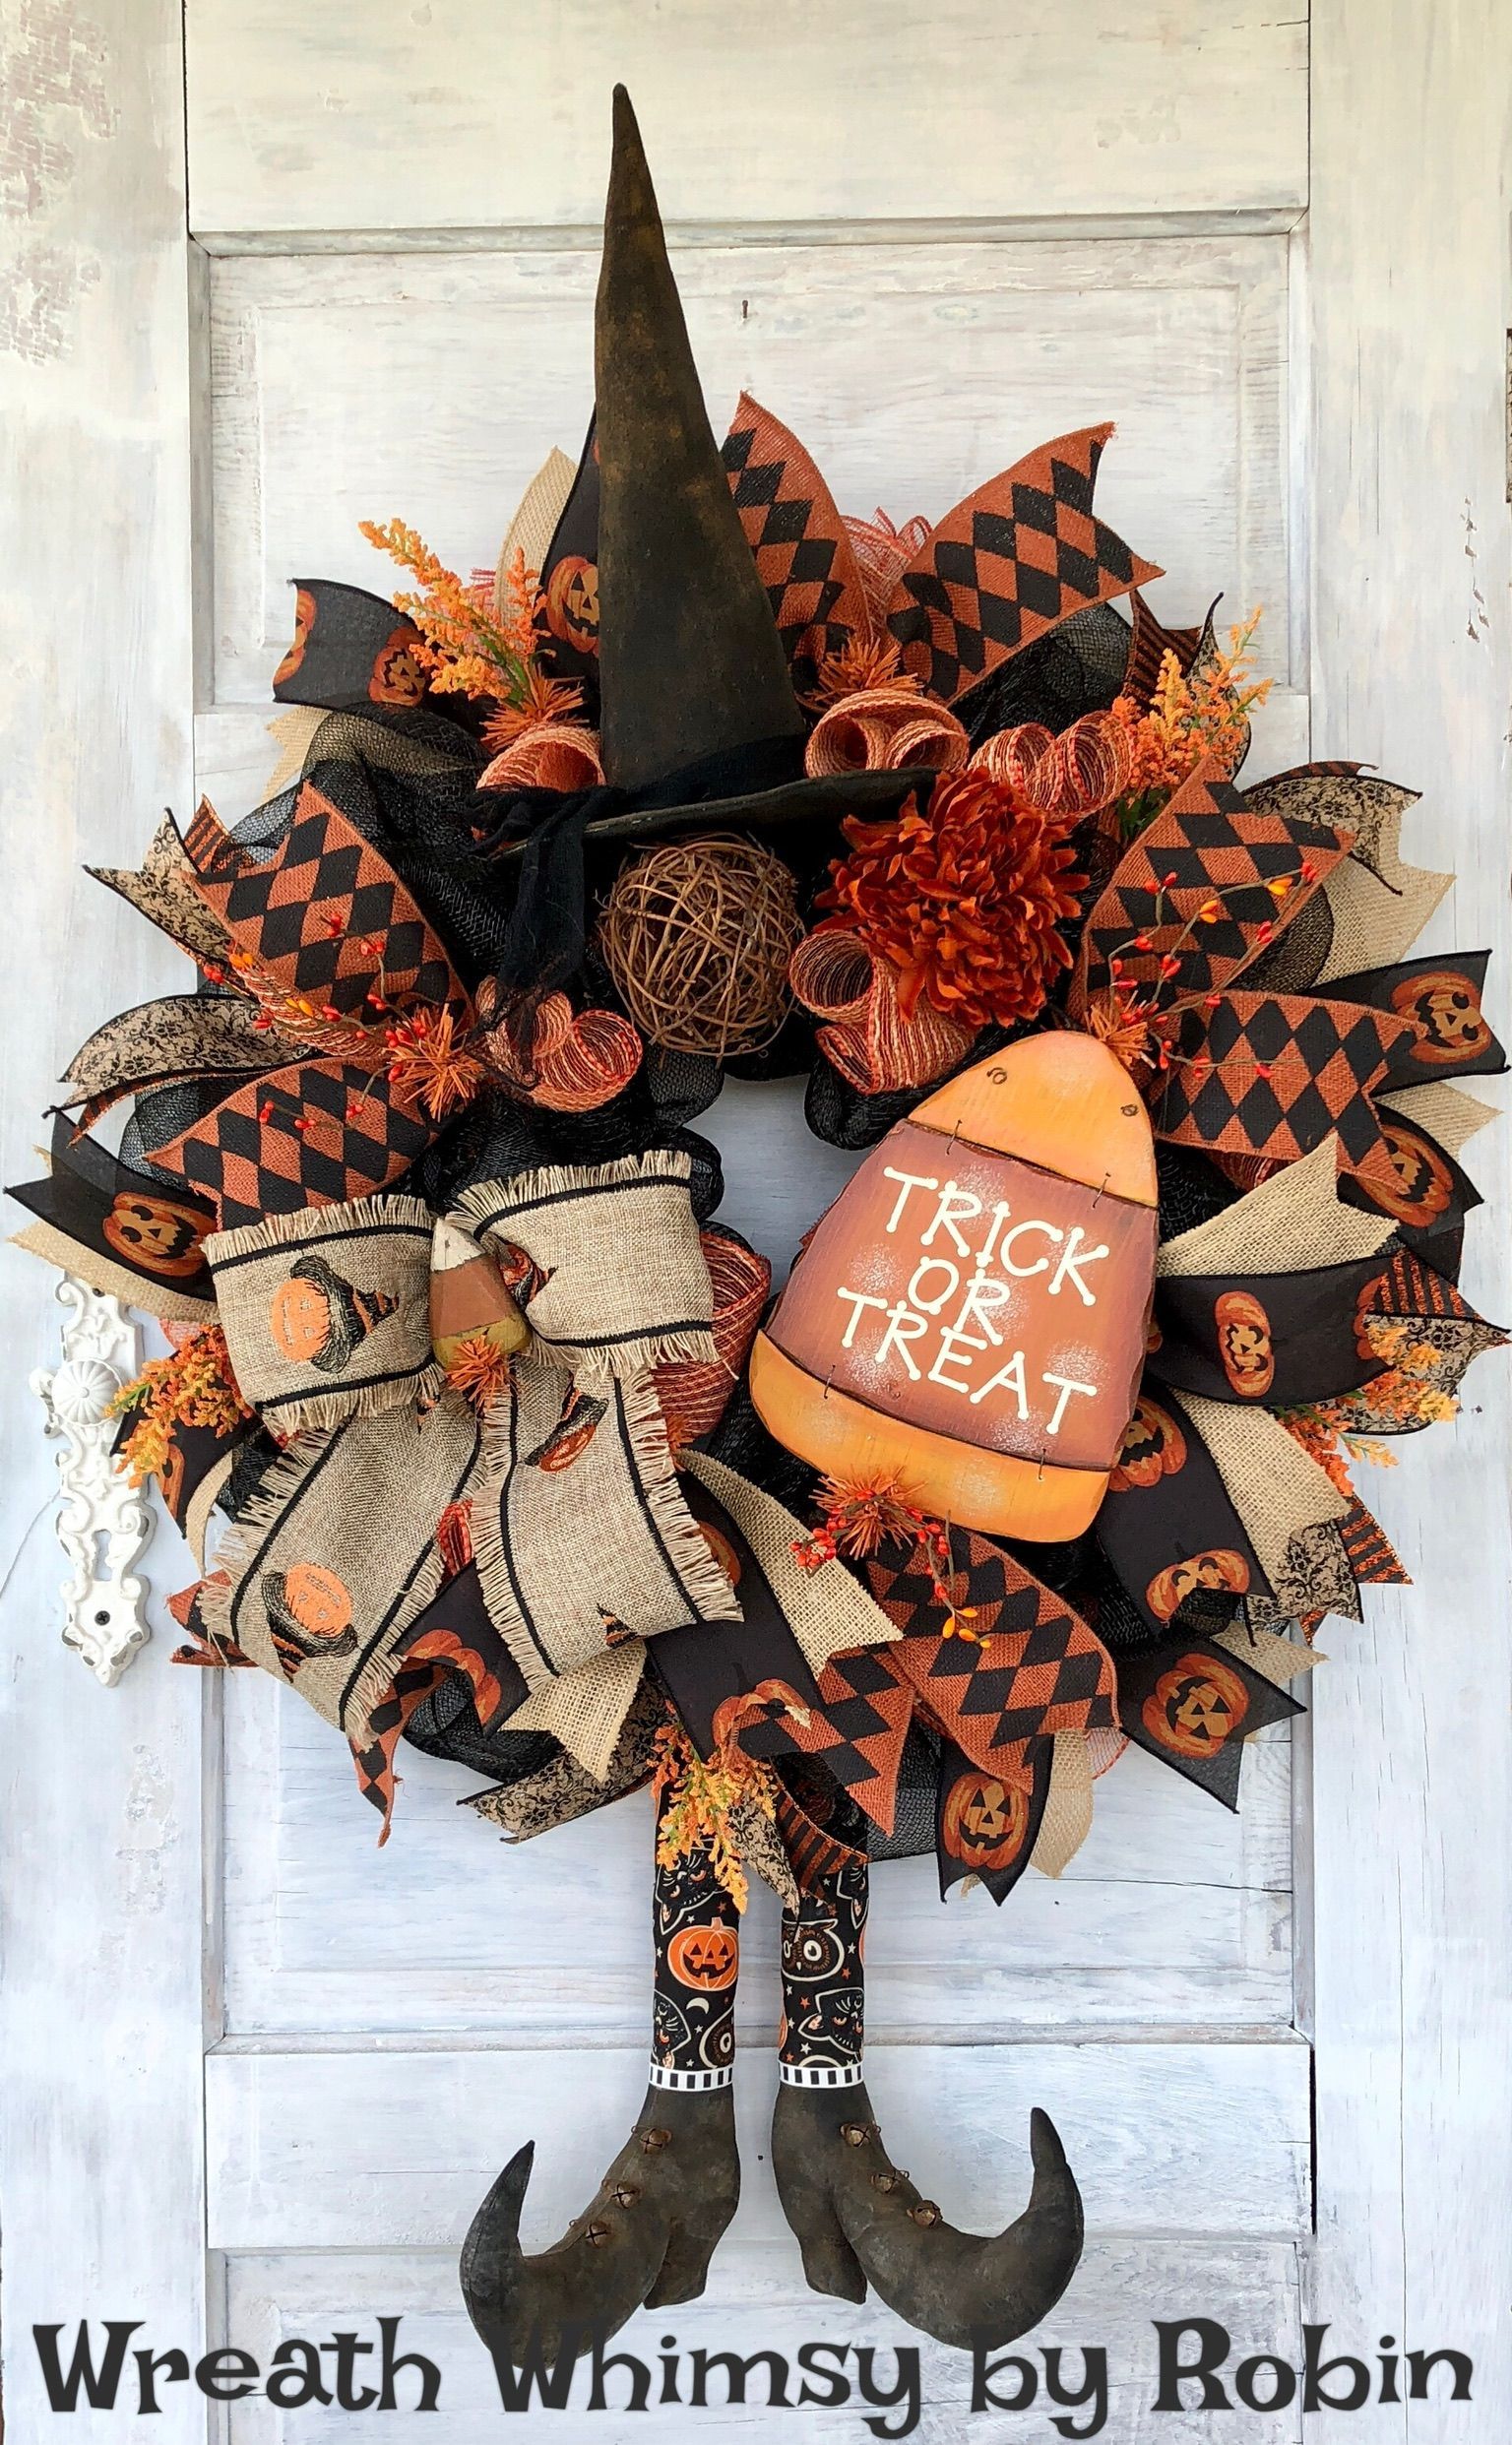 Unique Custom Made Wreaths for any Occasion by WreathWhimsybyRobin -   25 halloween crafts wreath
 ideas